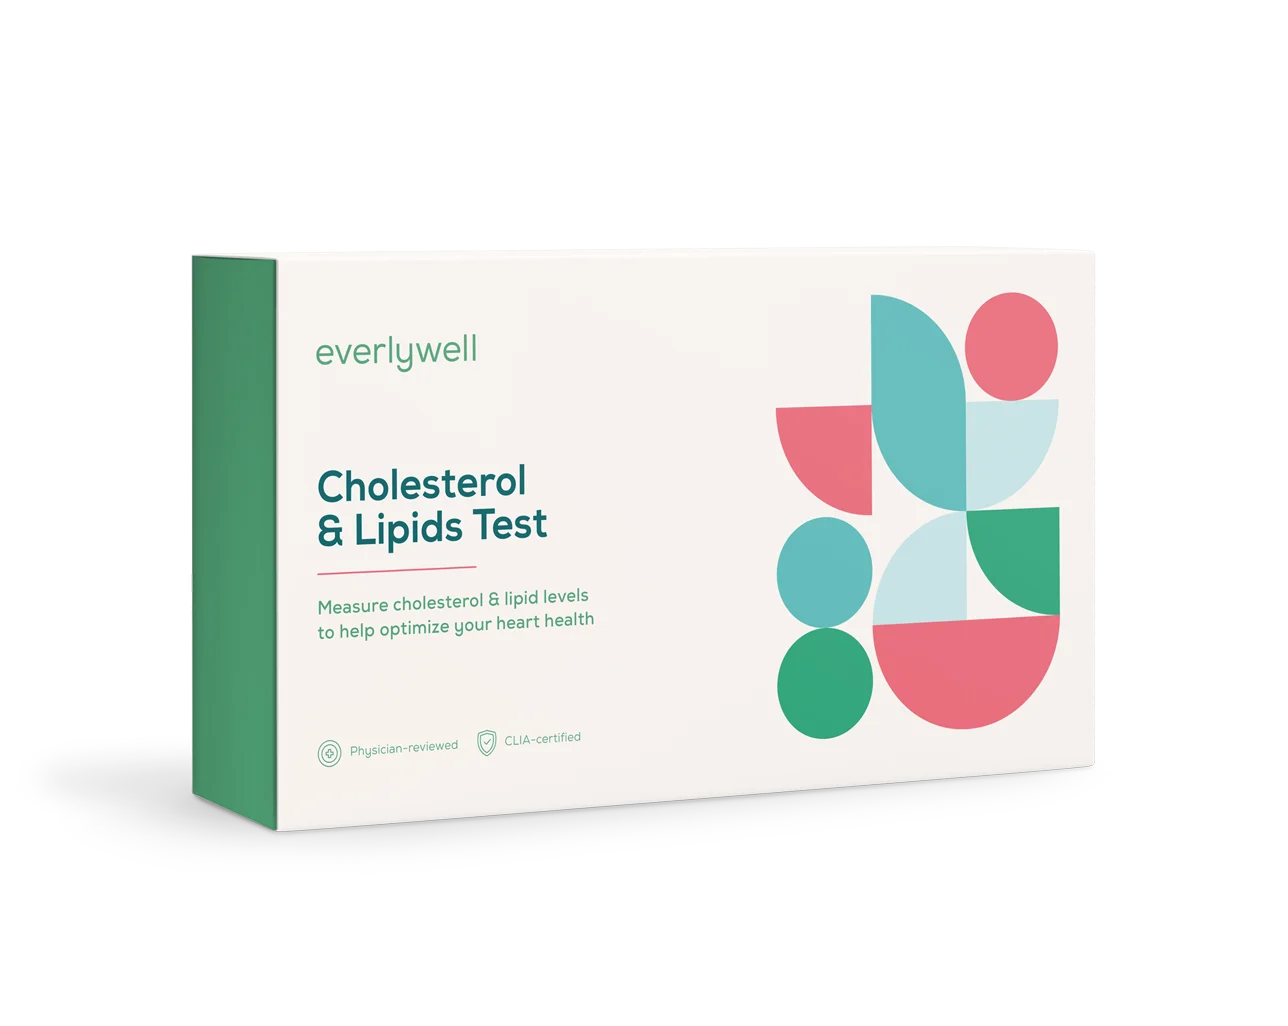 Everlywell at Home - Measure cholesterol and lipid levels, 1 Test